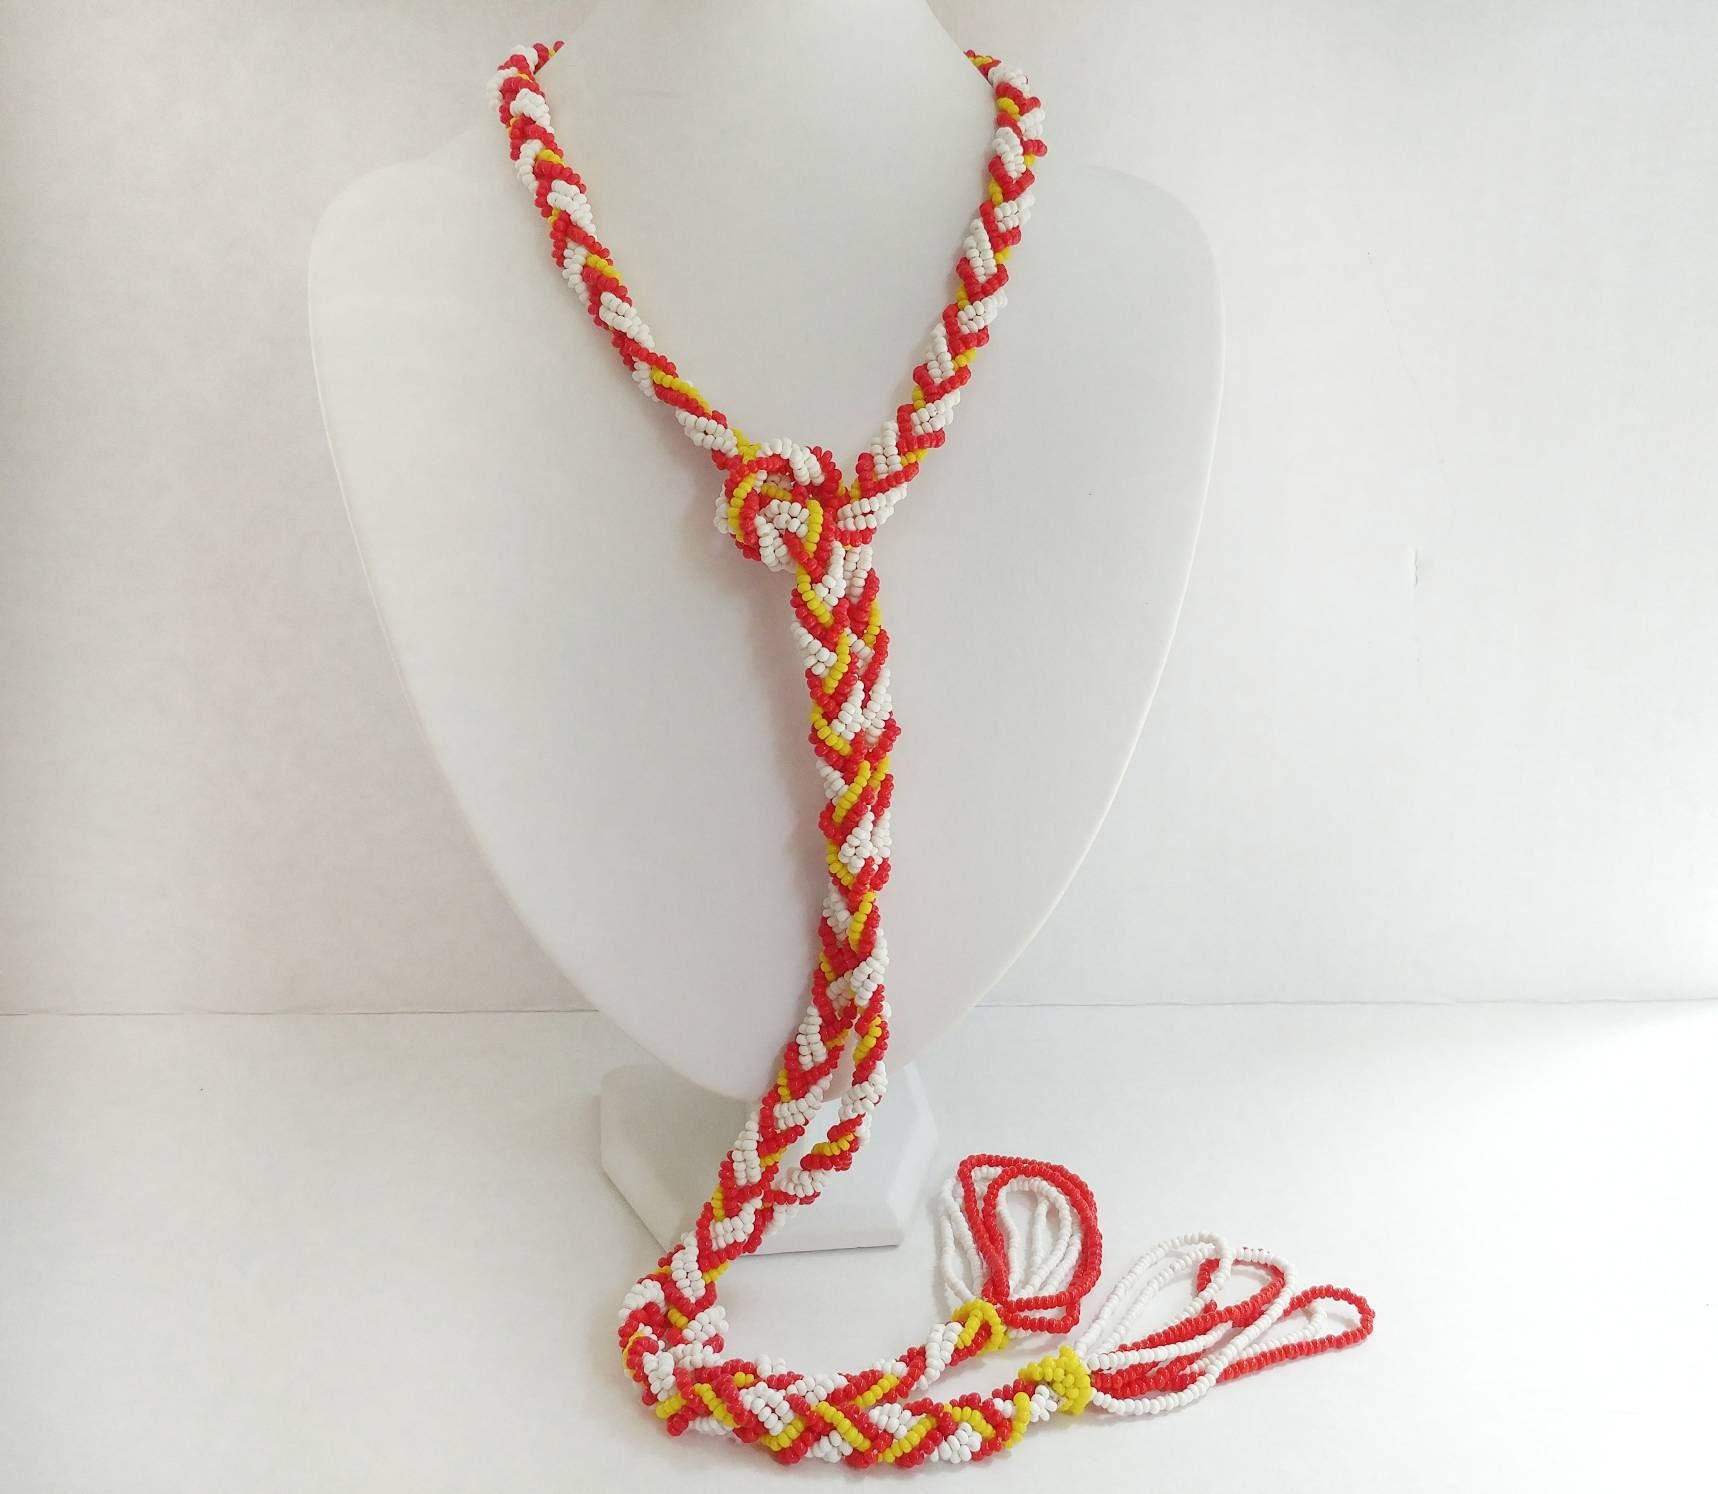 Stunning Handmade Beaded Braided Rope Style Statement Necklace Belt Headband Coil Wrap Red Yellow White Native American Boho Hippie